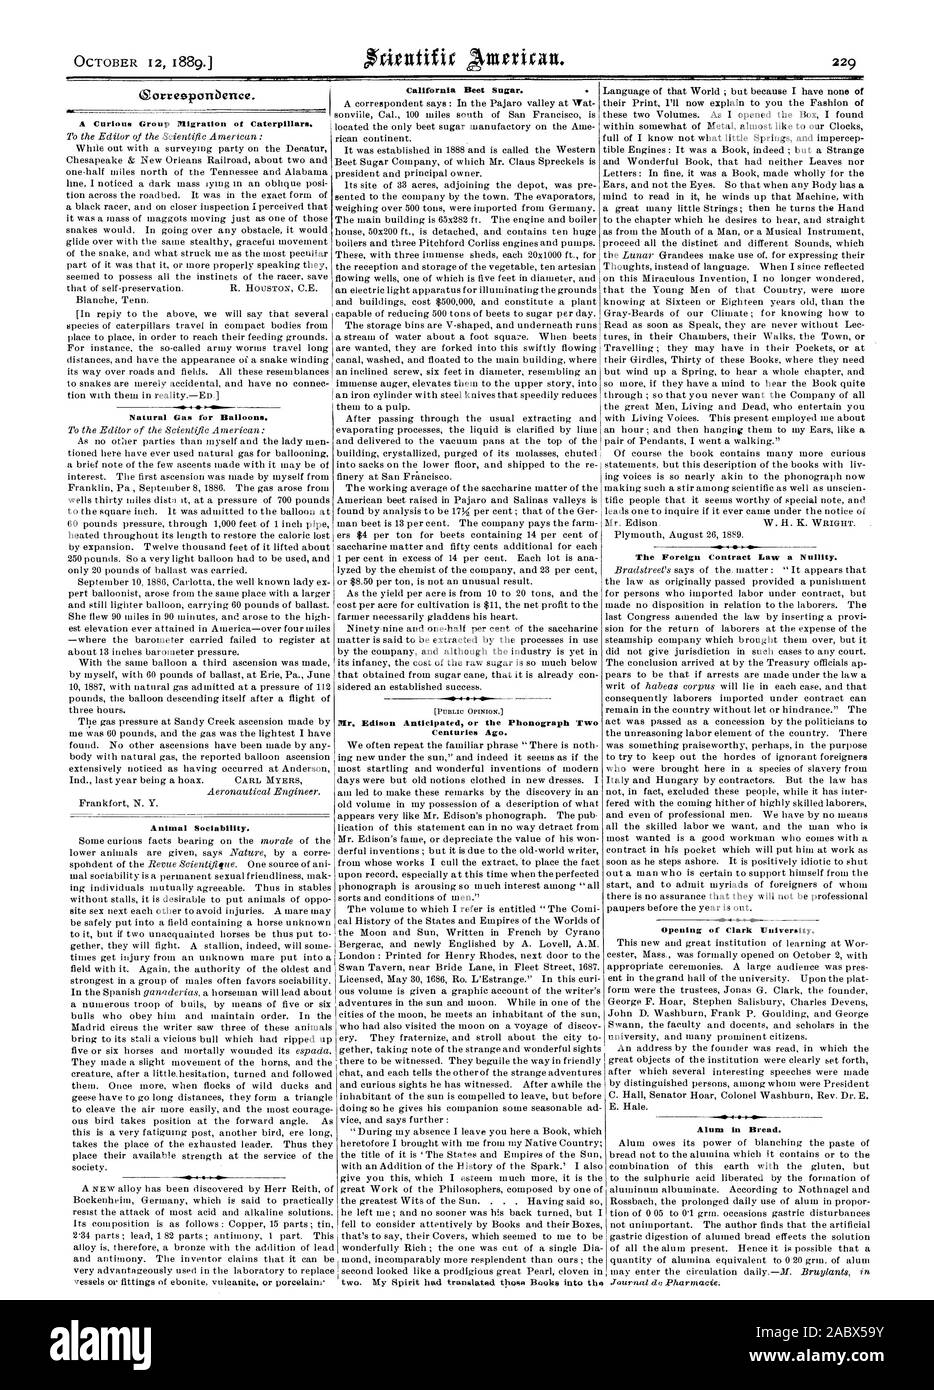 Animal Sociability. California Beet Sugar. Mr Edison Anticipated or the Phonograph Tw Centuries Ago. The Foreign Contract Law a Nullity. Opening of Clark University. Alum in Bread. Olorresponbence. A Curious Group Migration of Caterpillars. Natural Gas for Balloons., scientific american, 1889-10-12 Stock Photo